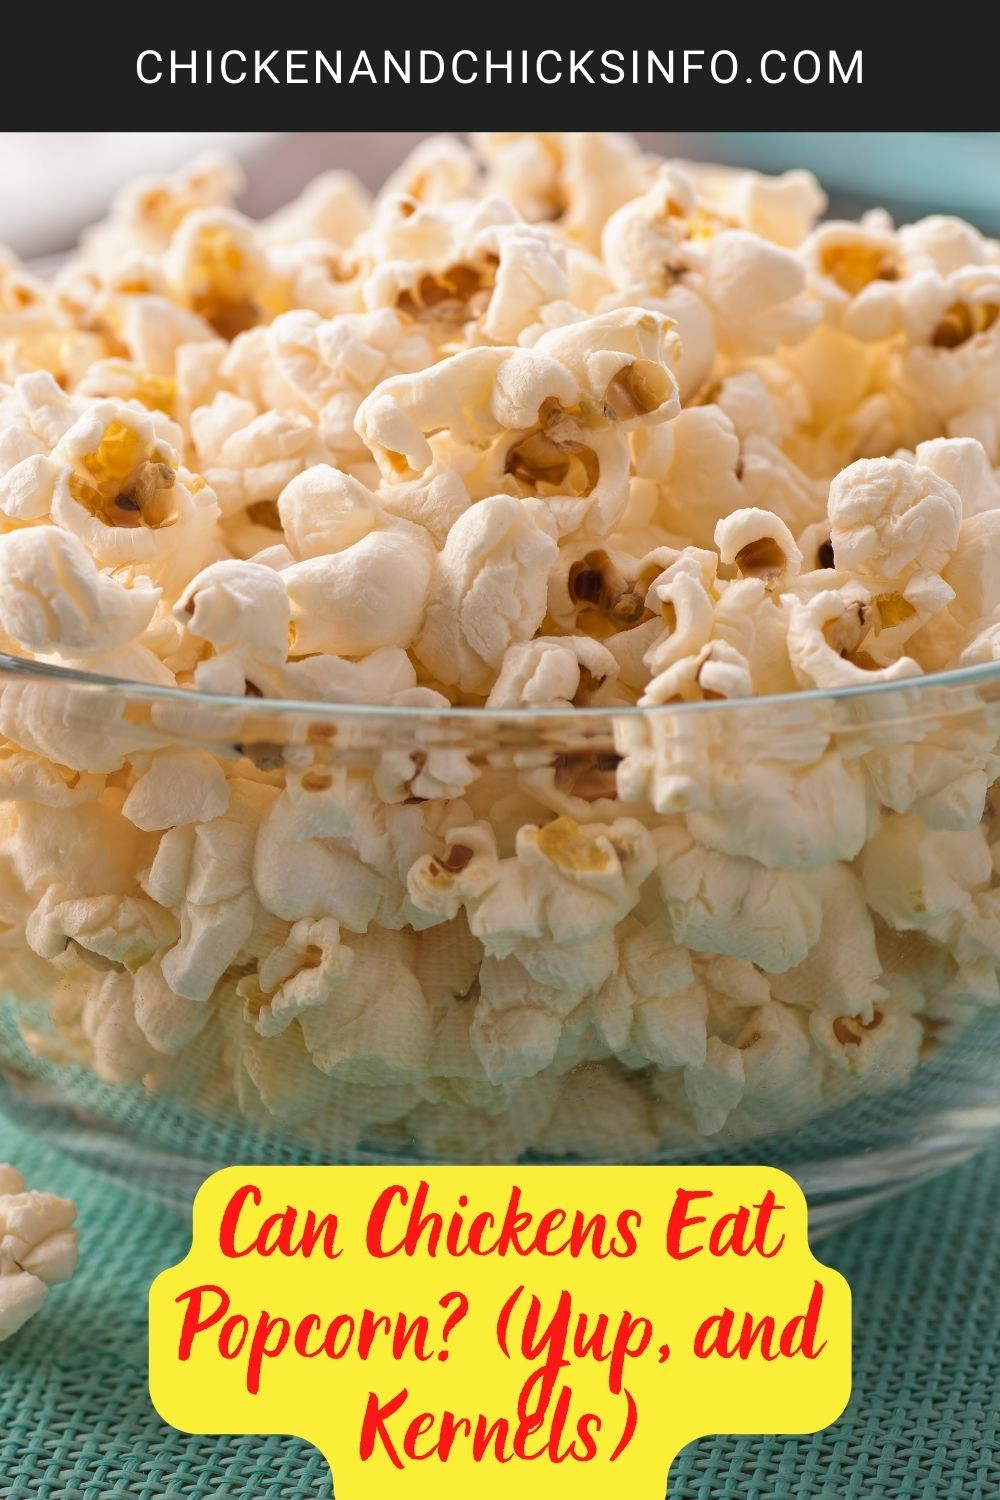 Can Chickens Eat Popcorn? (Yup, and Kernels) poster.
